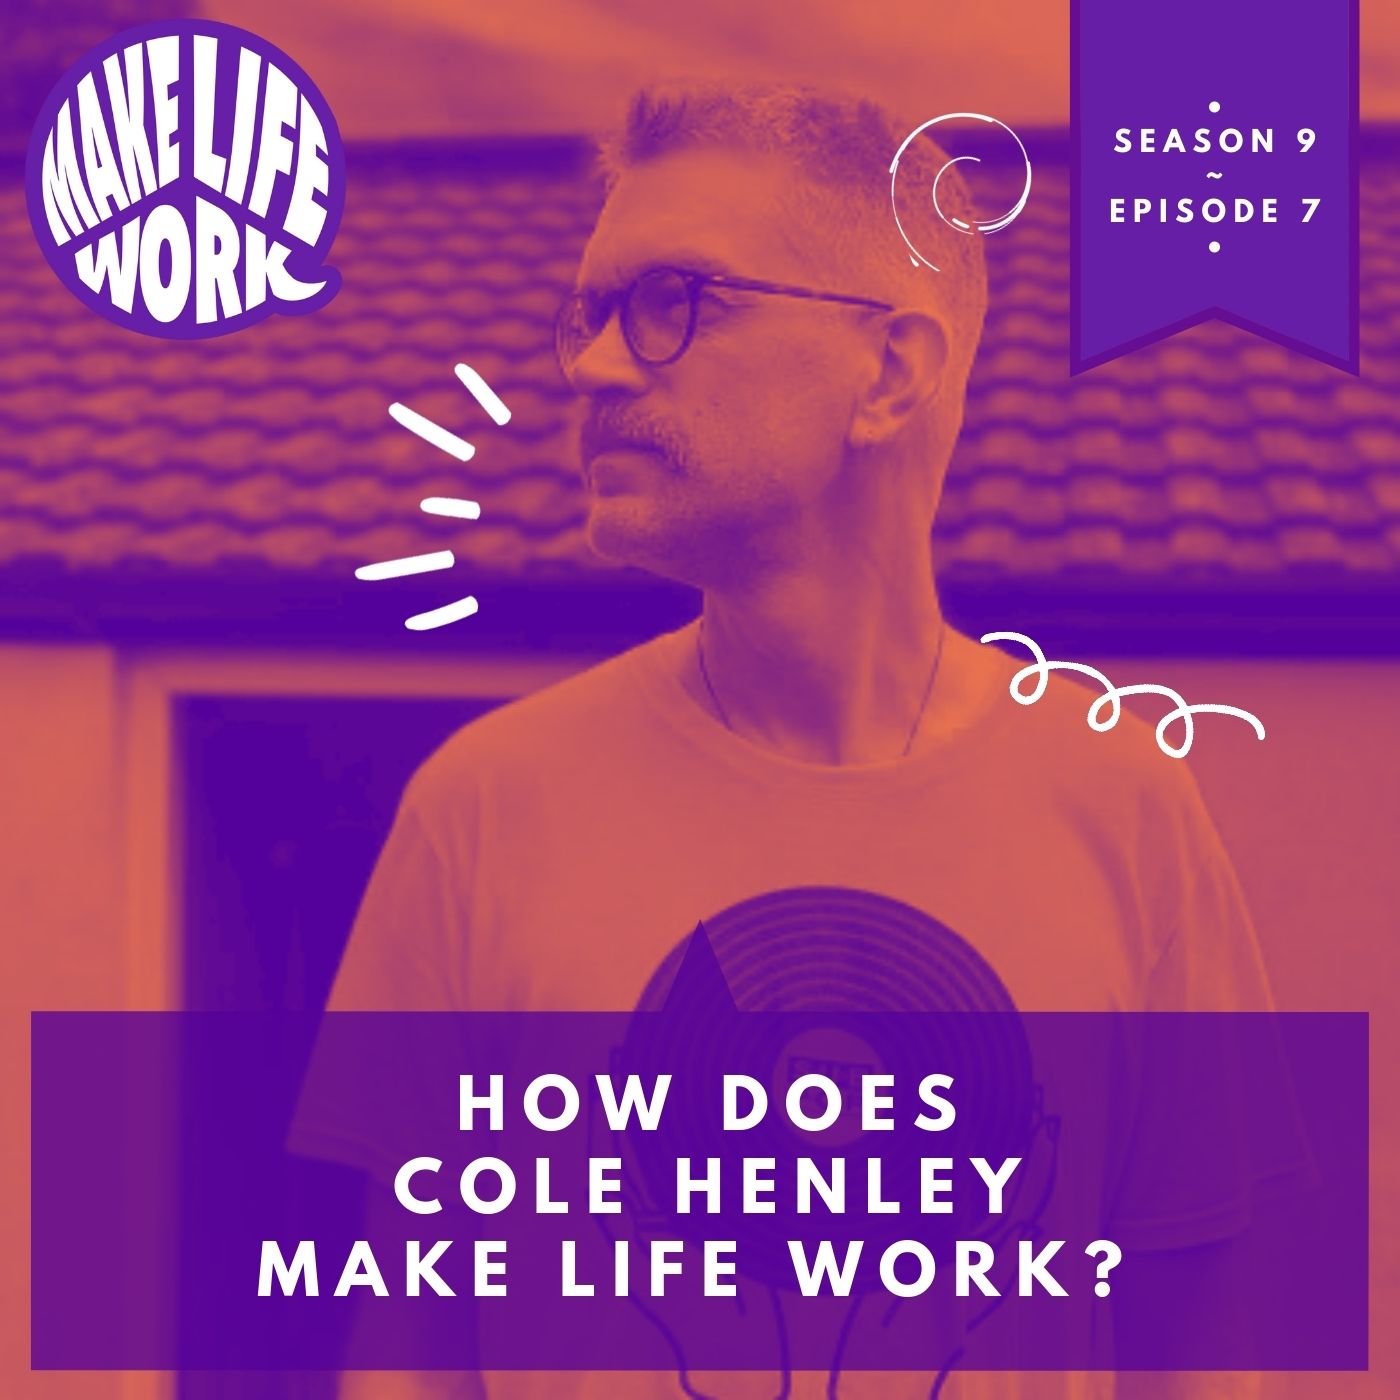 How does Cole Henley make life work?